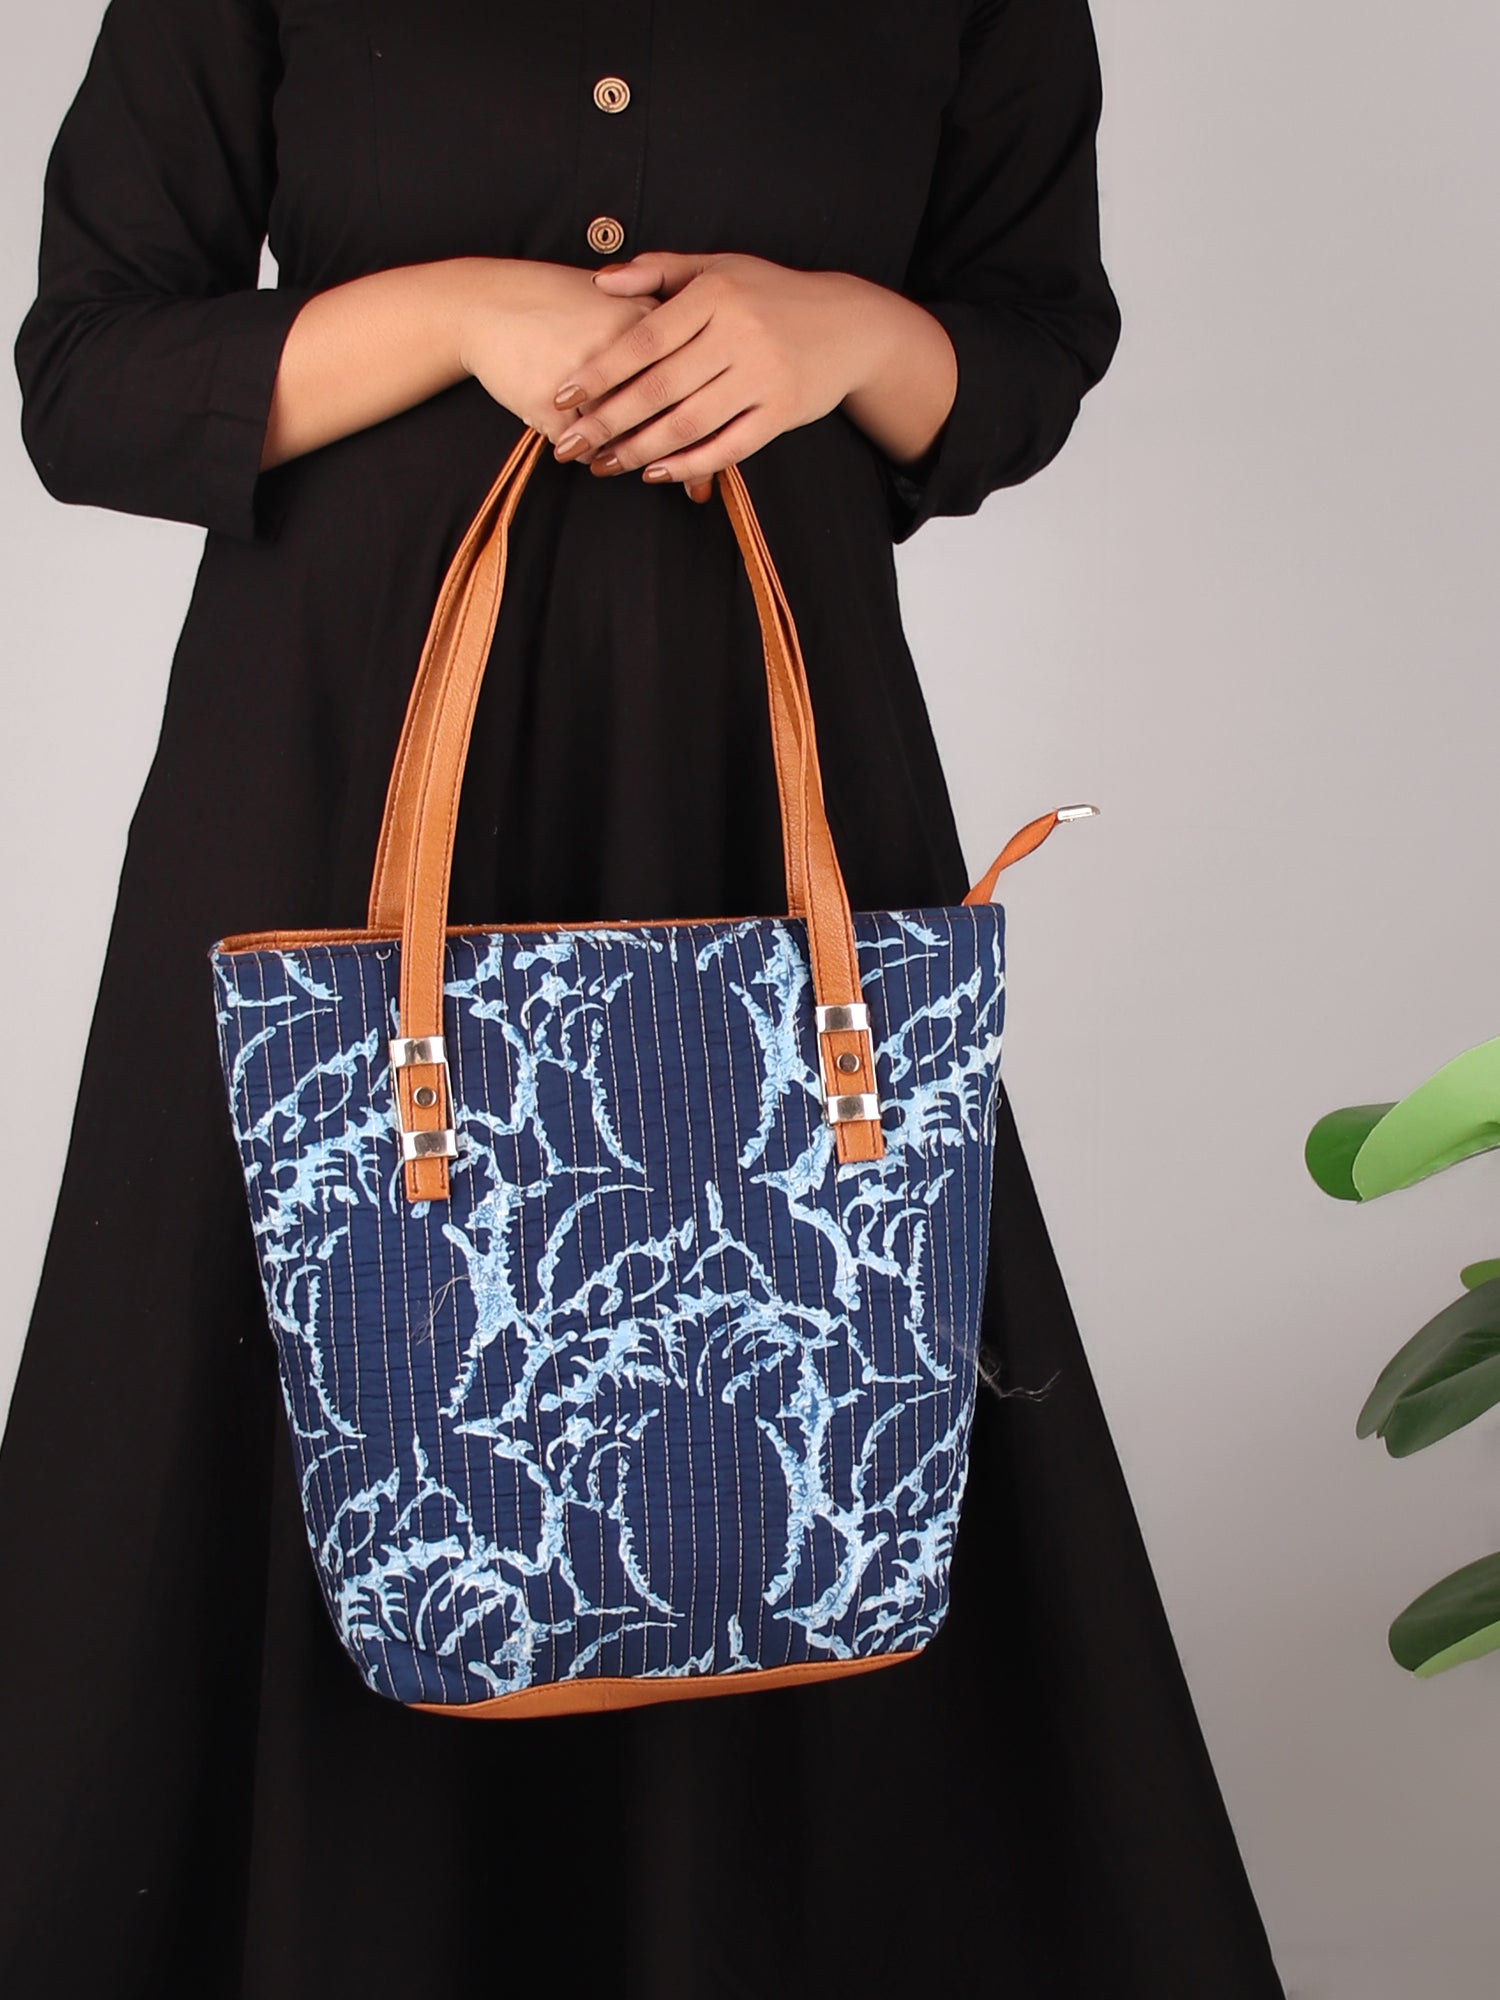 ABSTRACT FLOWERS TOTE BAG